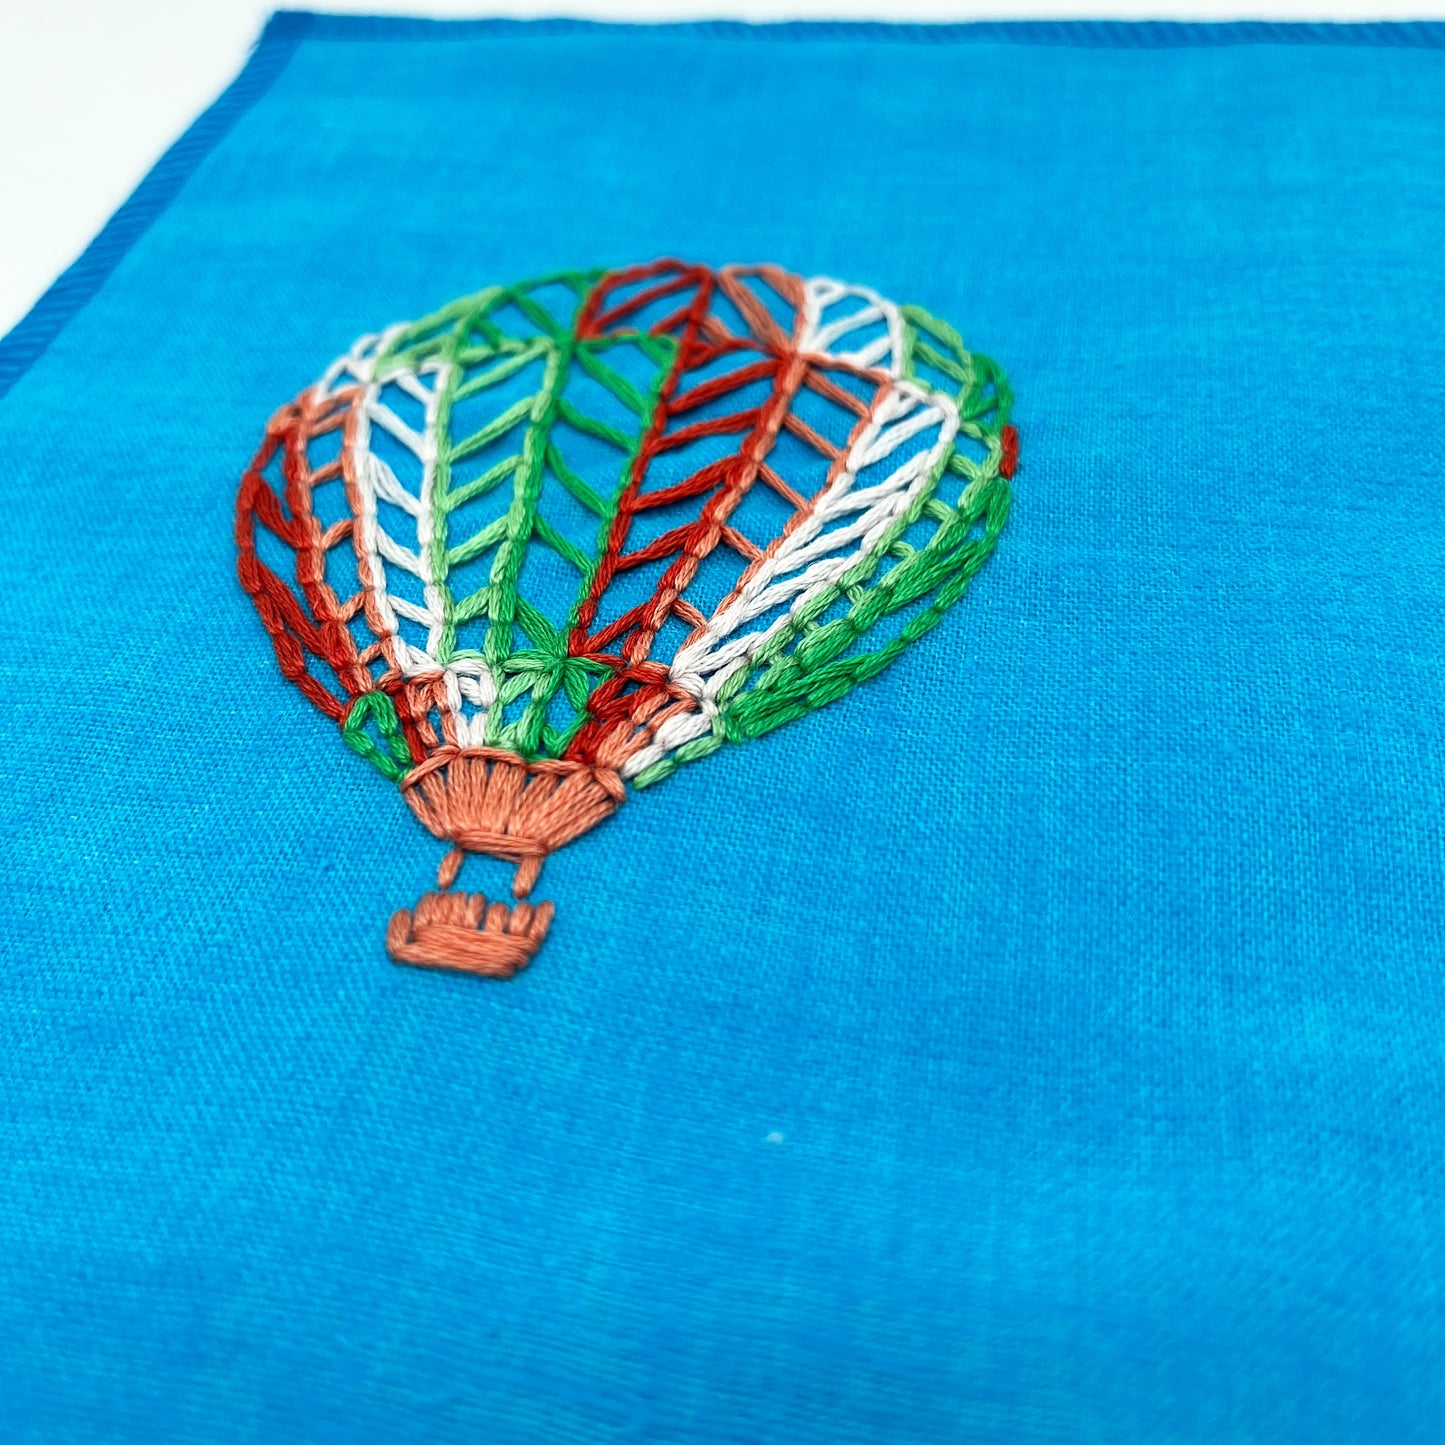 a close up angled view of a bright blue fabric wall hanging with a hot air balloon stitched on it off center, in red, pink, light pink, light green and dark green colored thread, on a white background